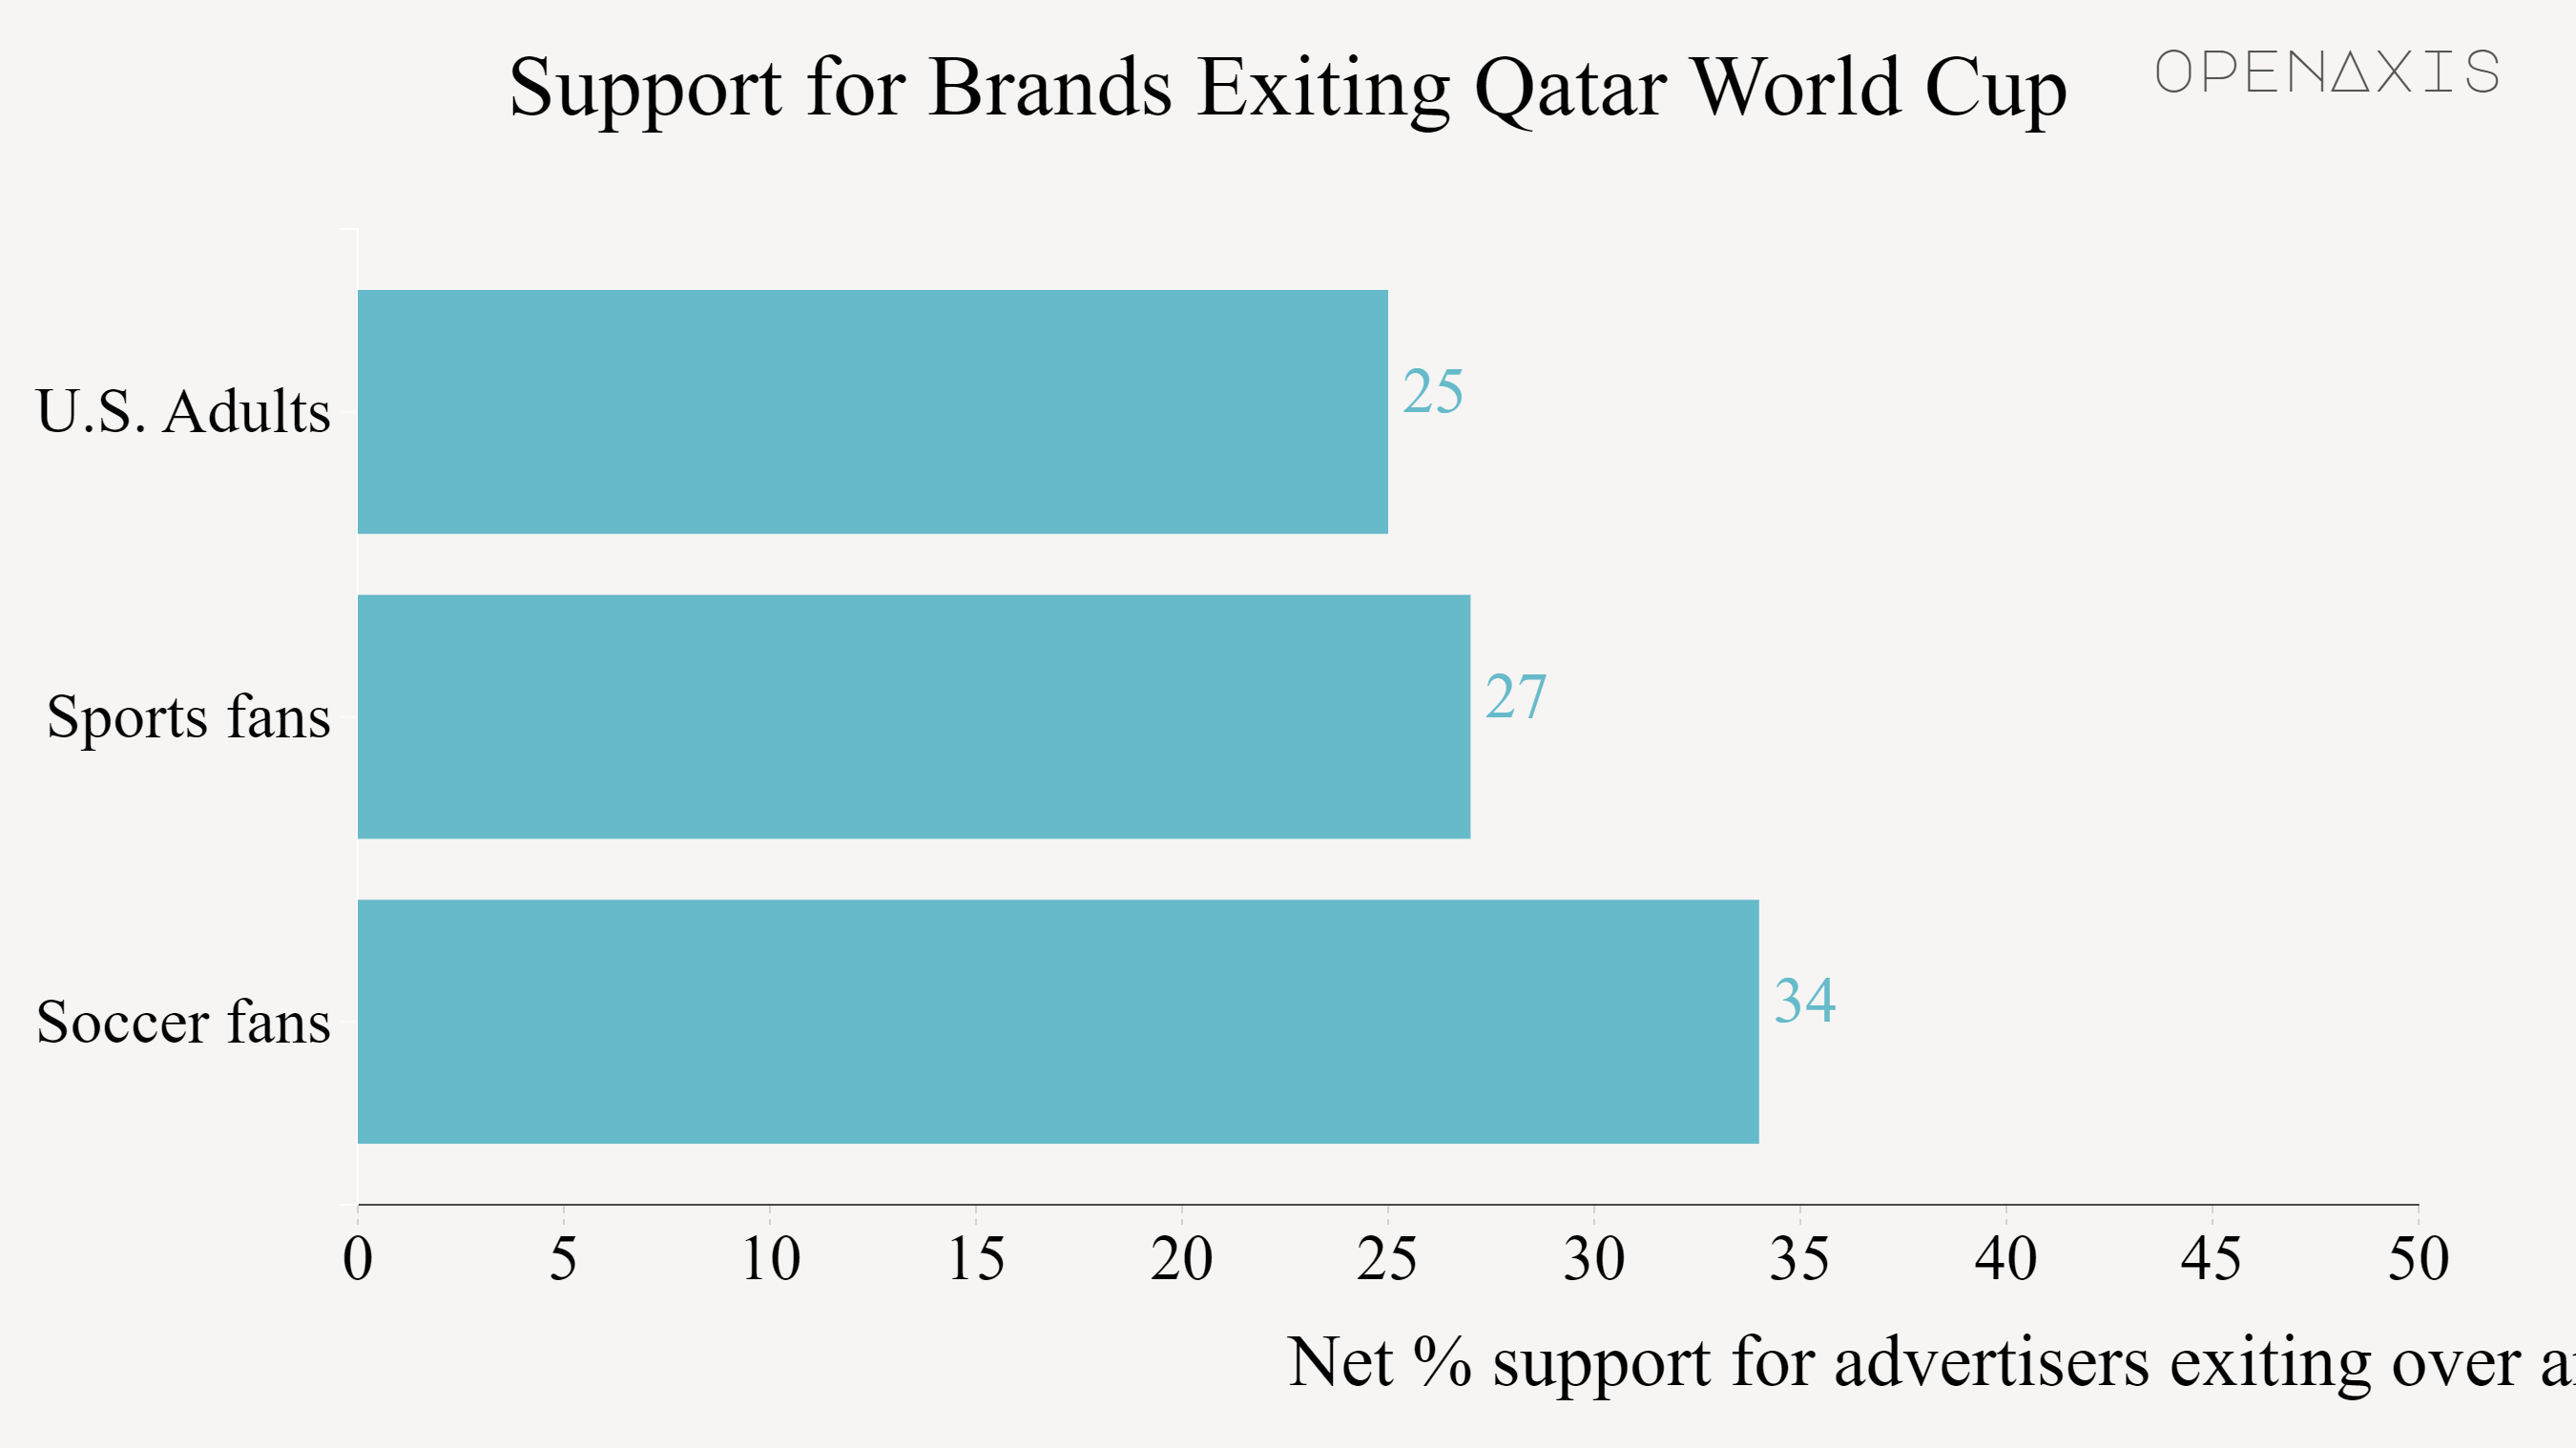 "Support for Brands Exiting Qatar World Cup"